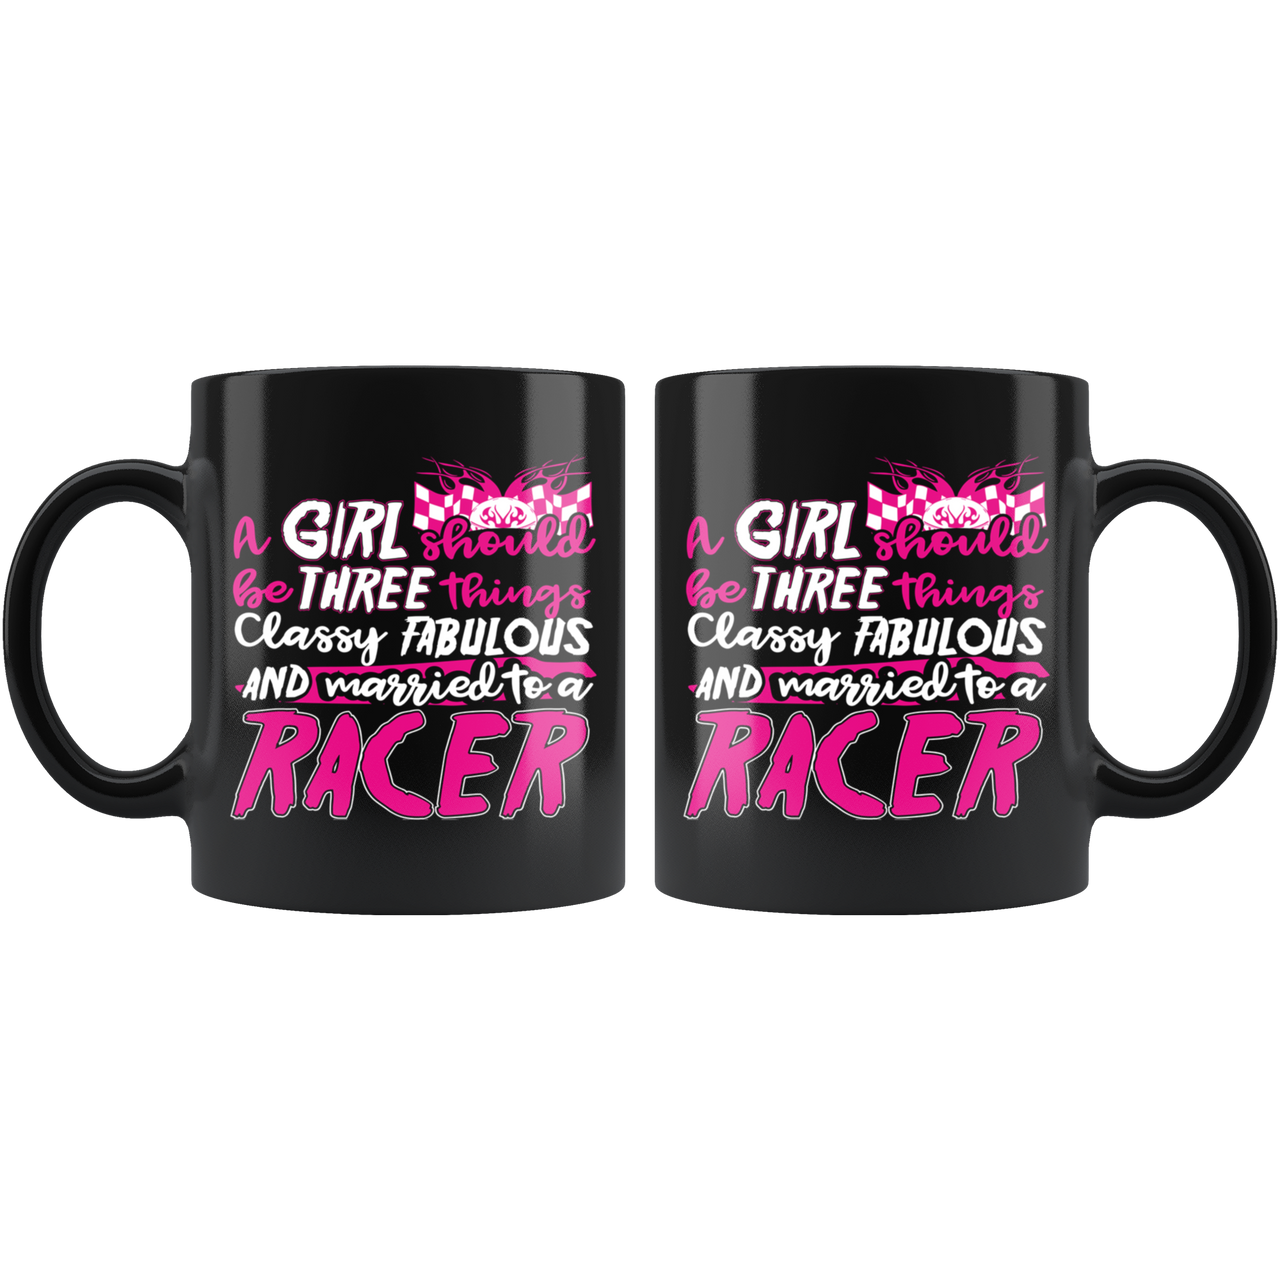 A Girl Should Be 3 Things Classy Fabulous And Married To A Racer Mug!